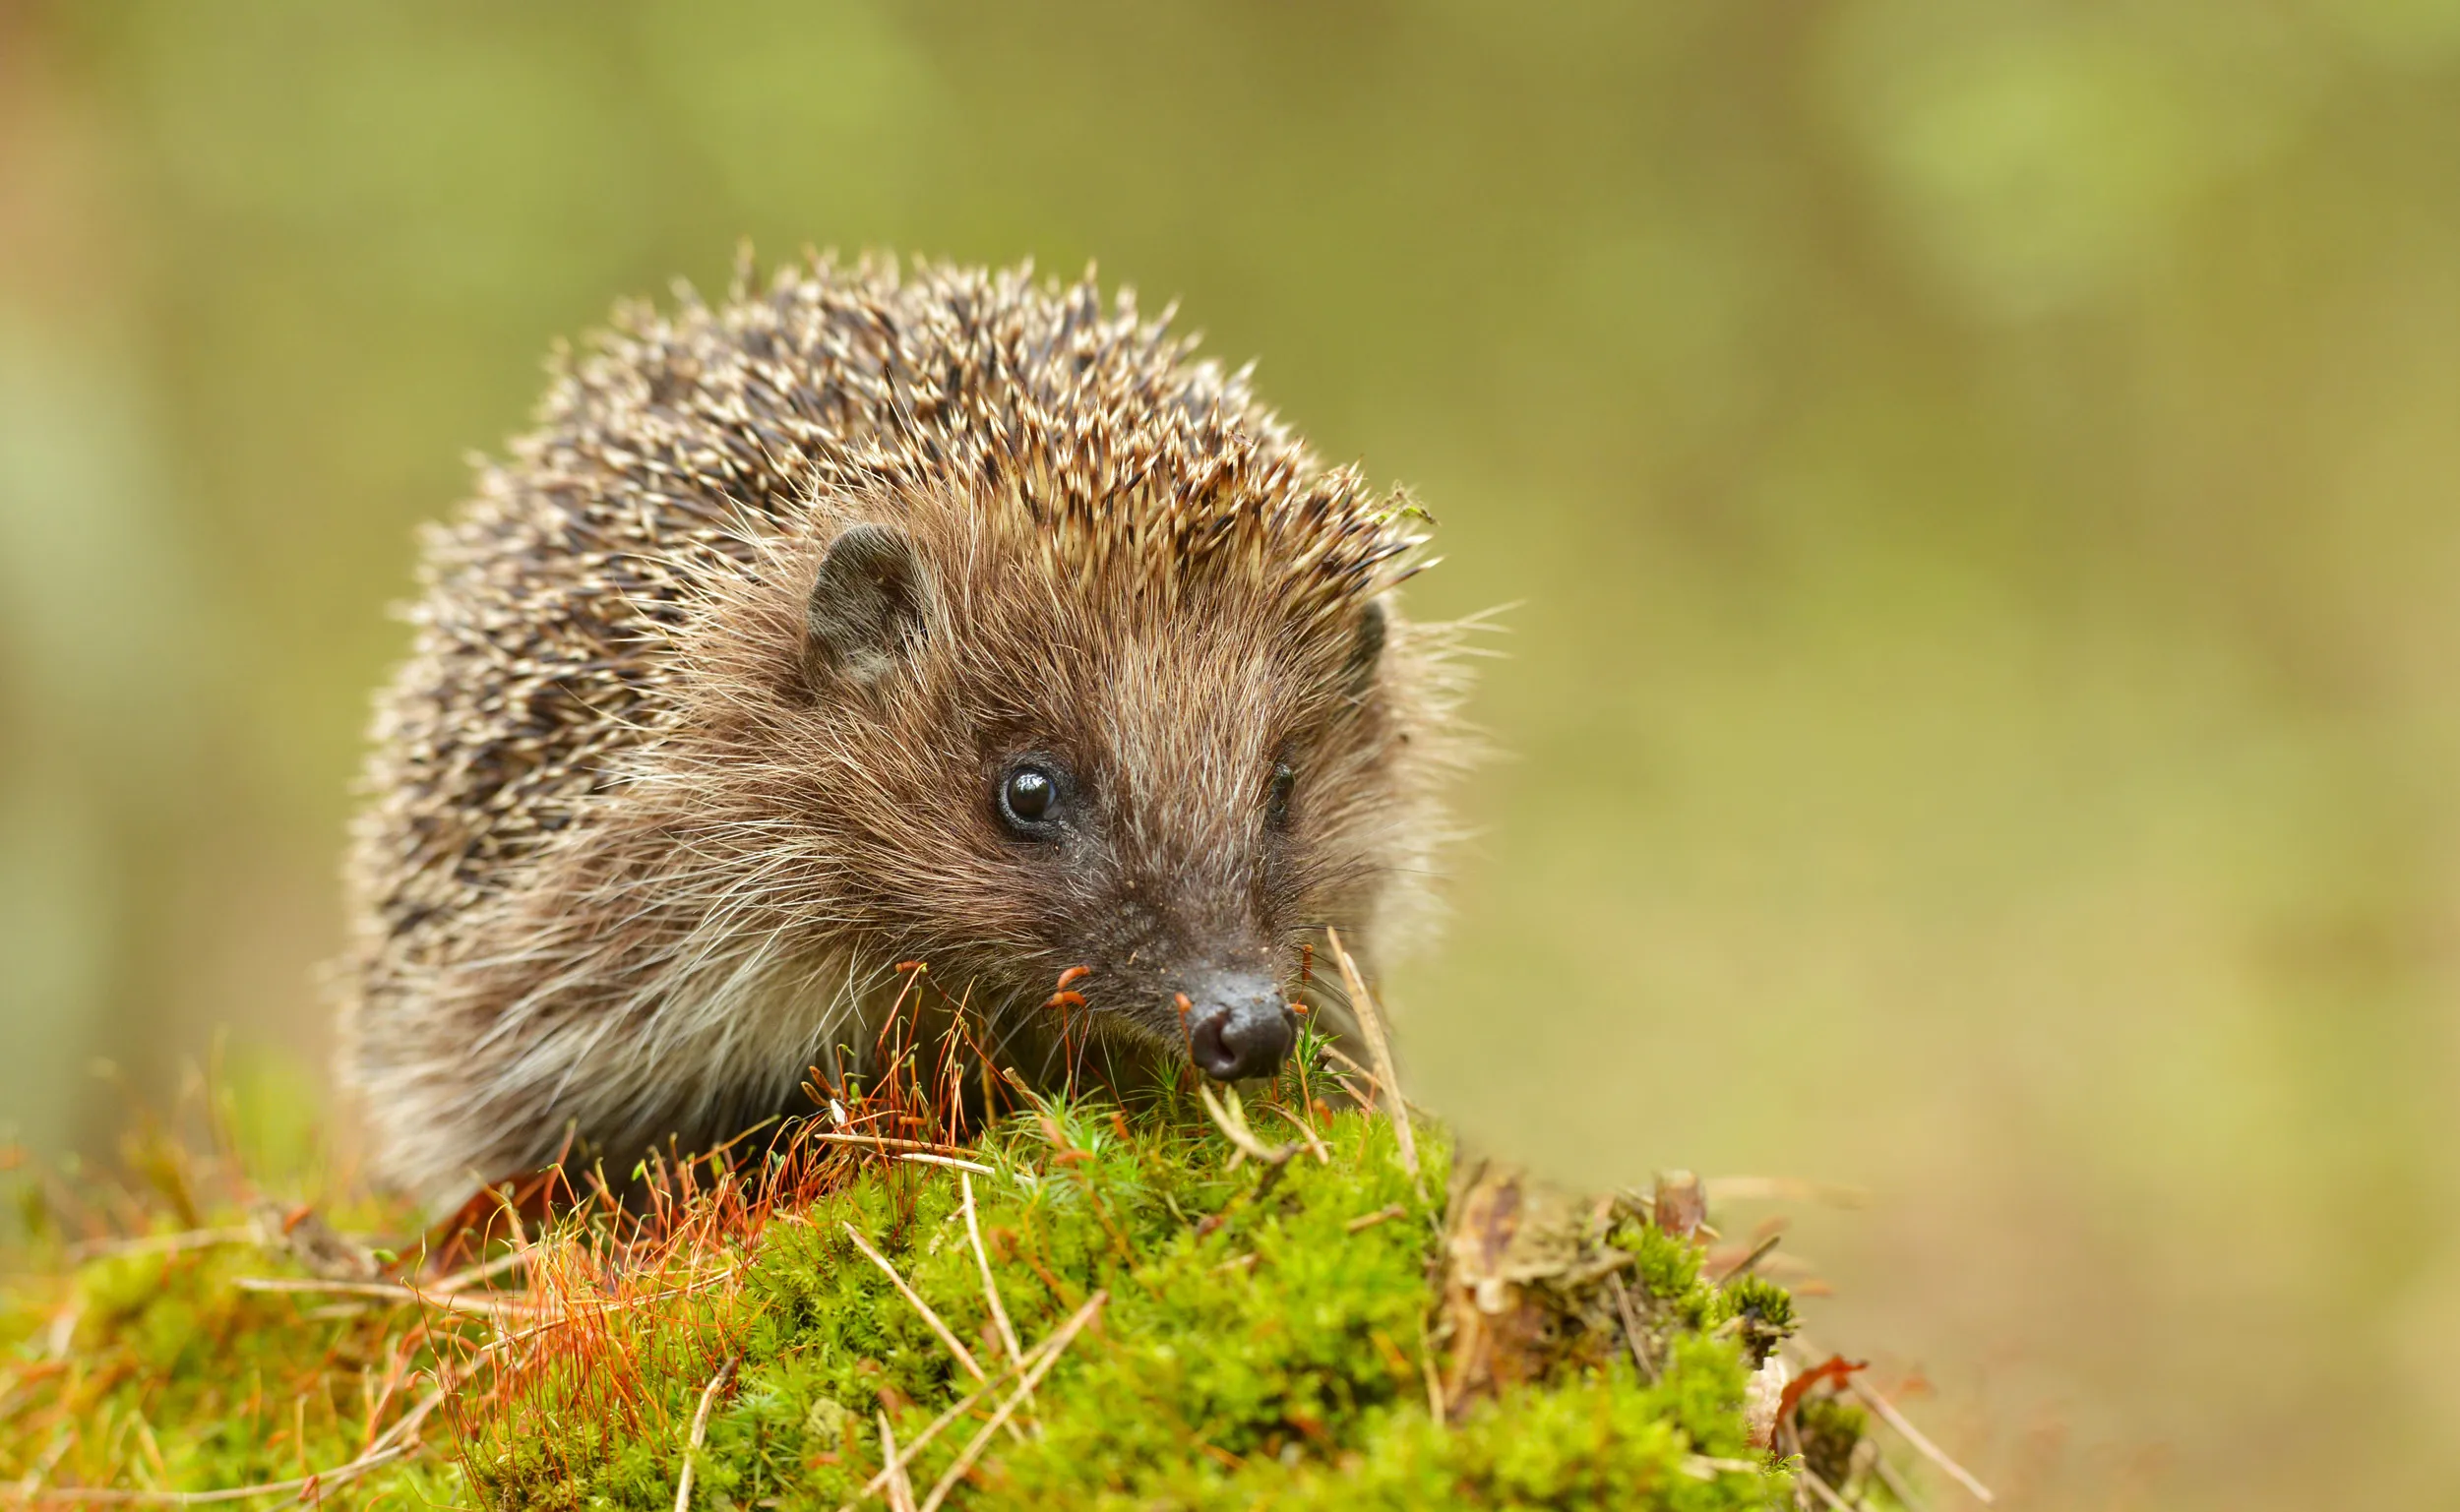 A lone Hedgehog sat on top of a moss covered log.